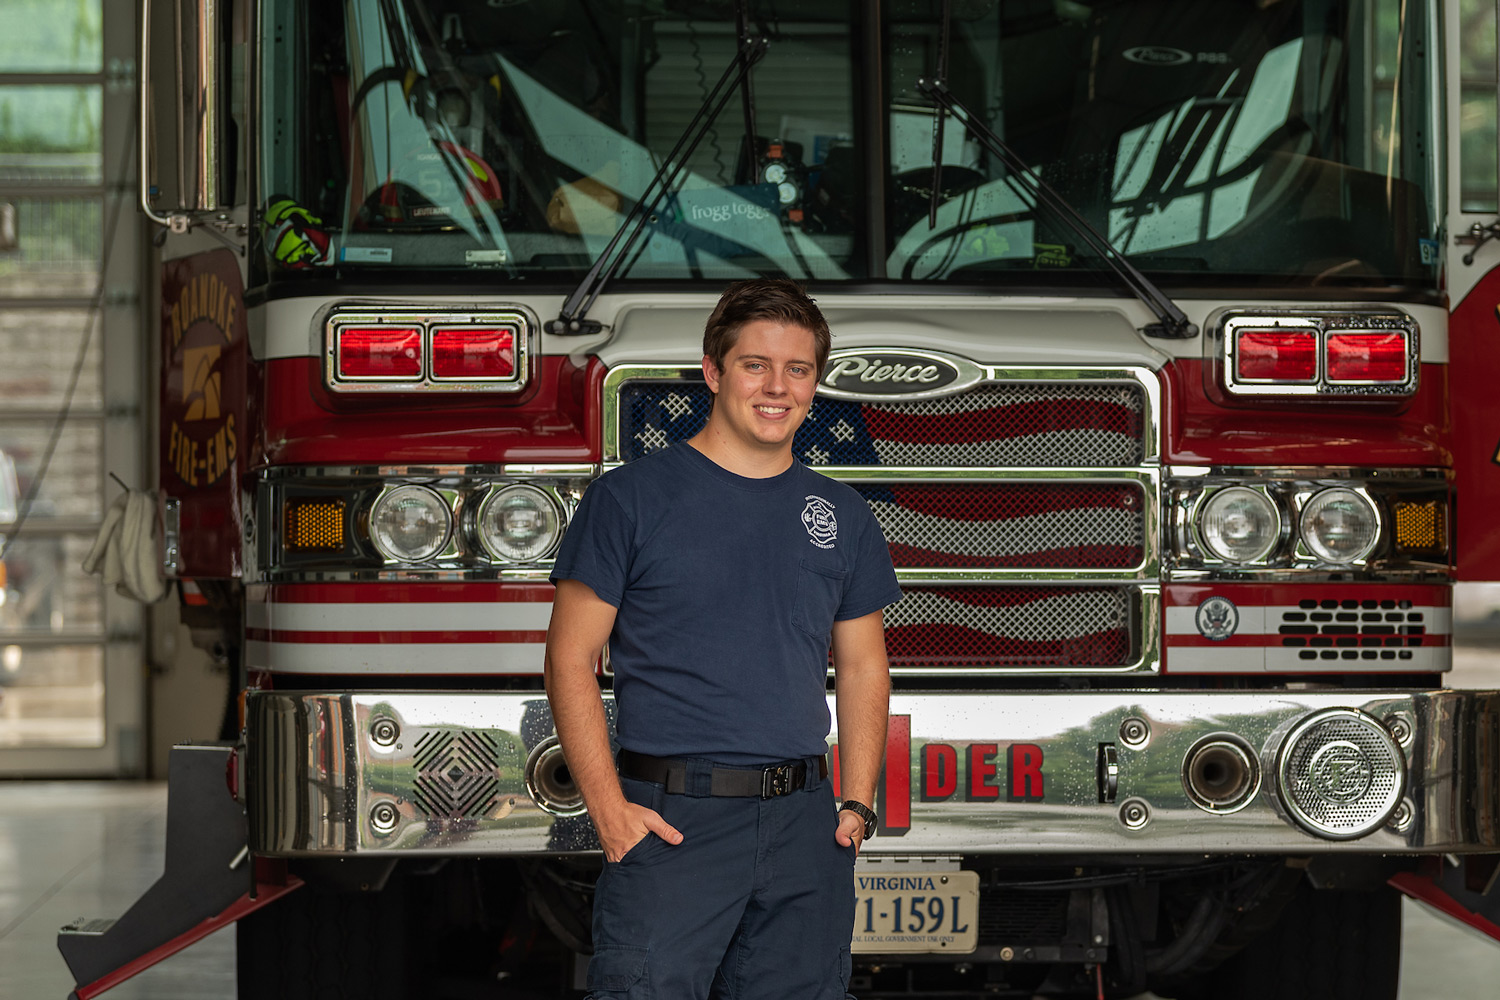 man in front of fire truck